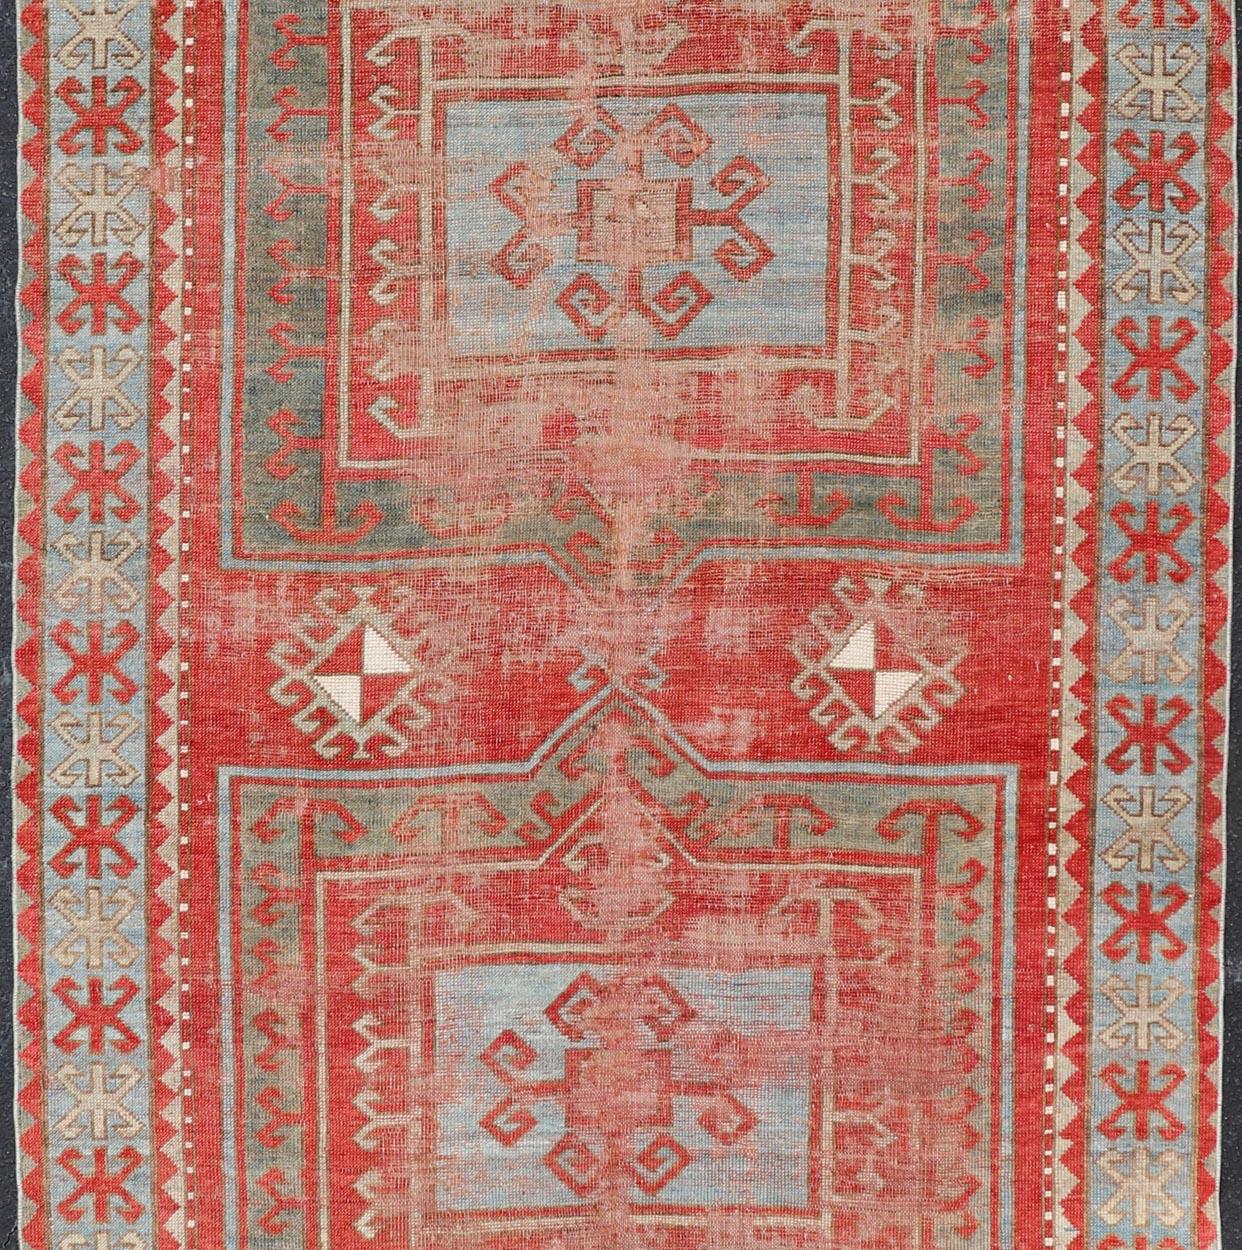 This antique Kazak hand-knotted rug features a geometric double box design and is enclosed within a complementary, multi-tiered border. The rug is rendered in blue, cream, red and brown tones; making this rug a perfect fit for a variety of classic,